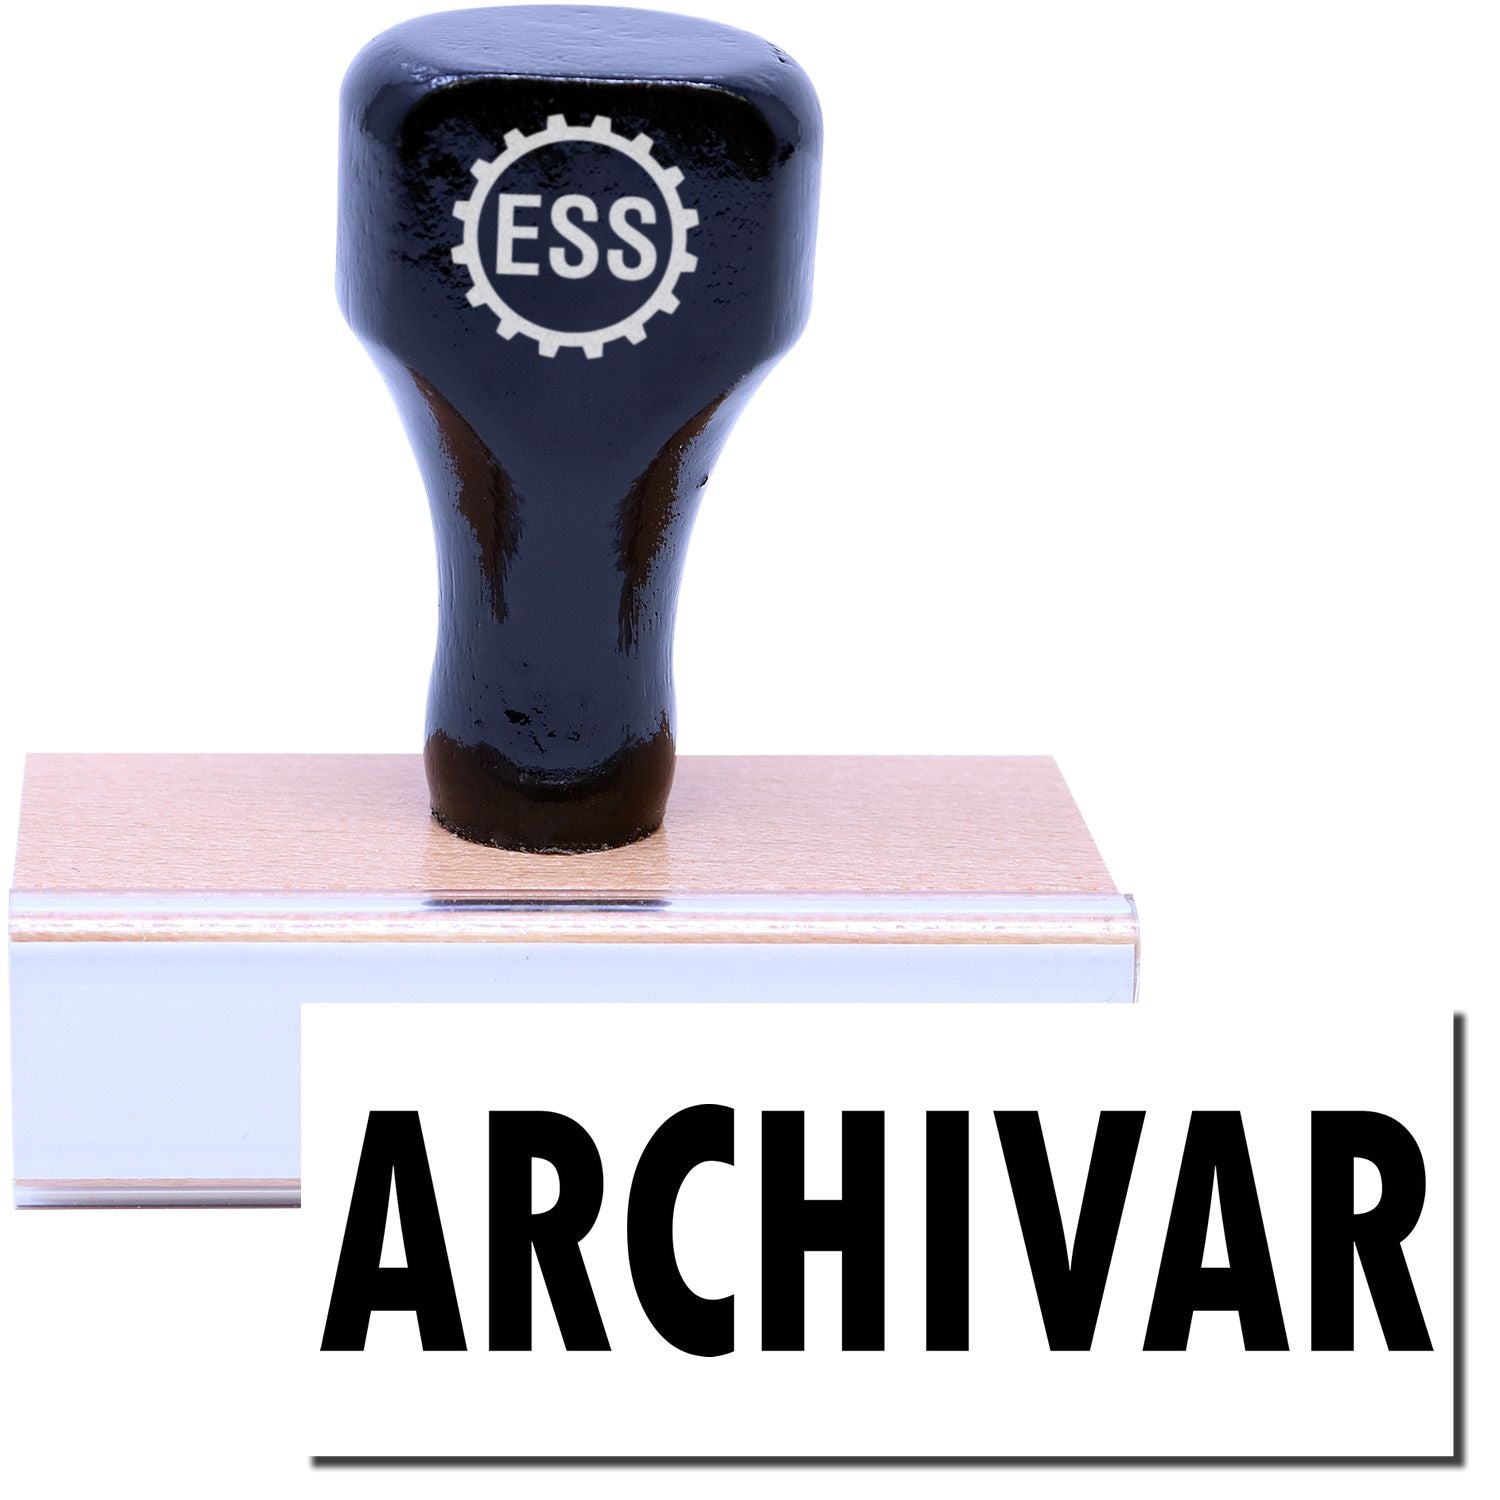 A stock office rubber stamp with a stamped image showing how the text "ARCHIVAR" is displayed after stamping.